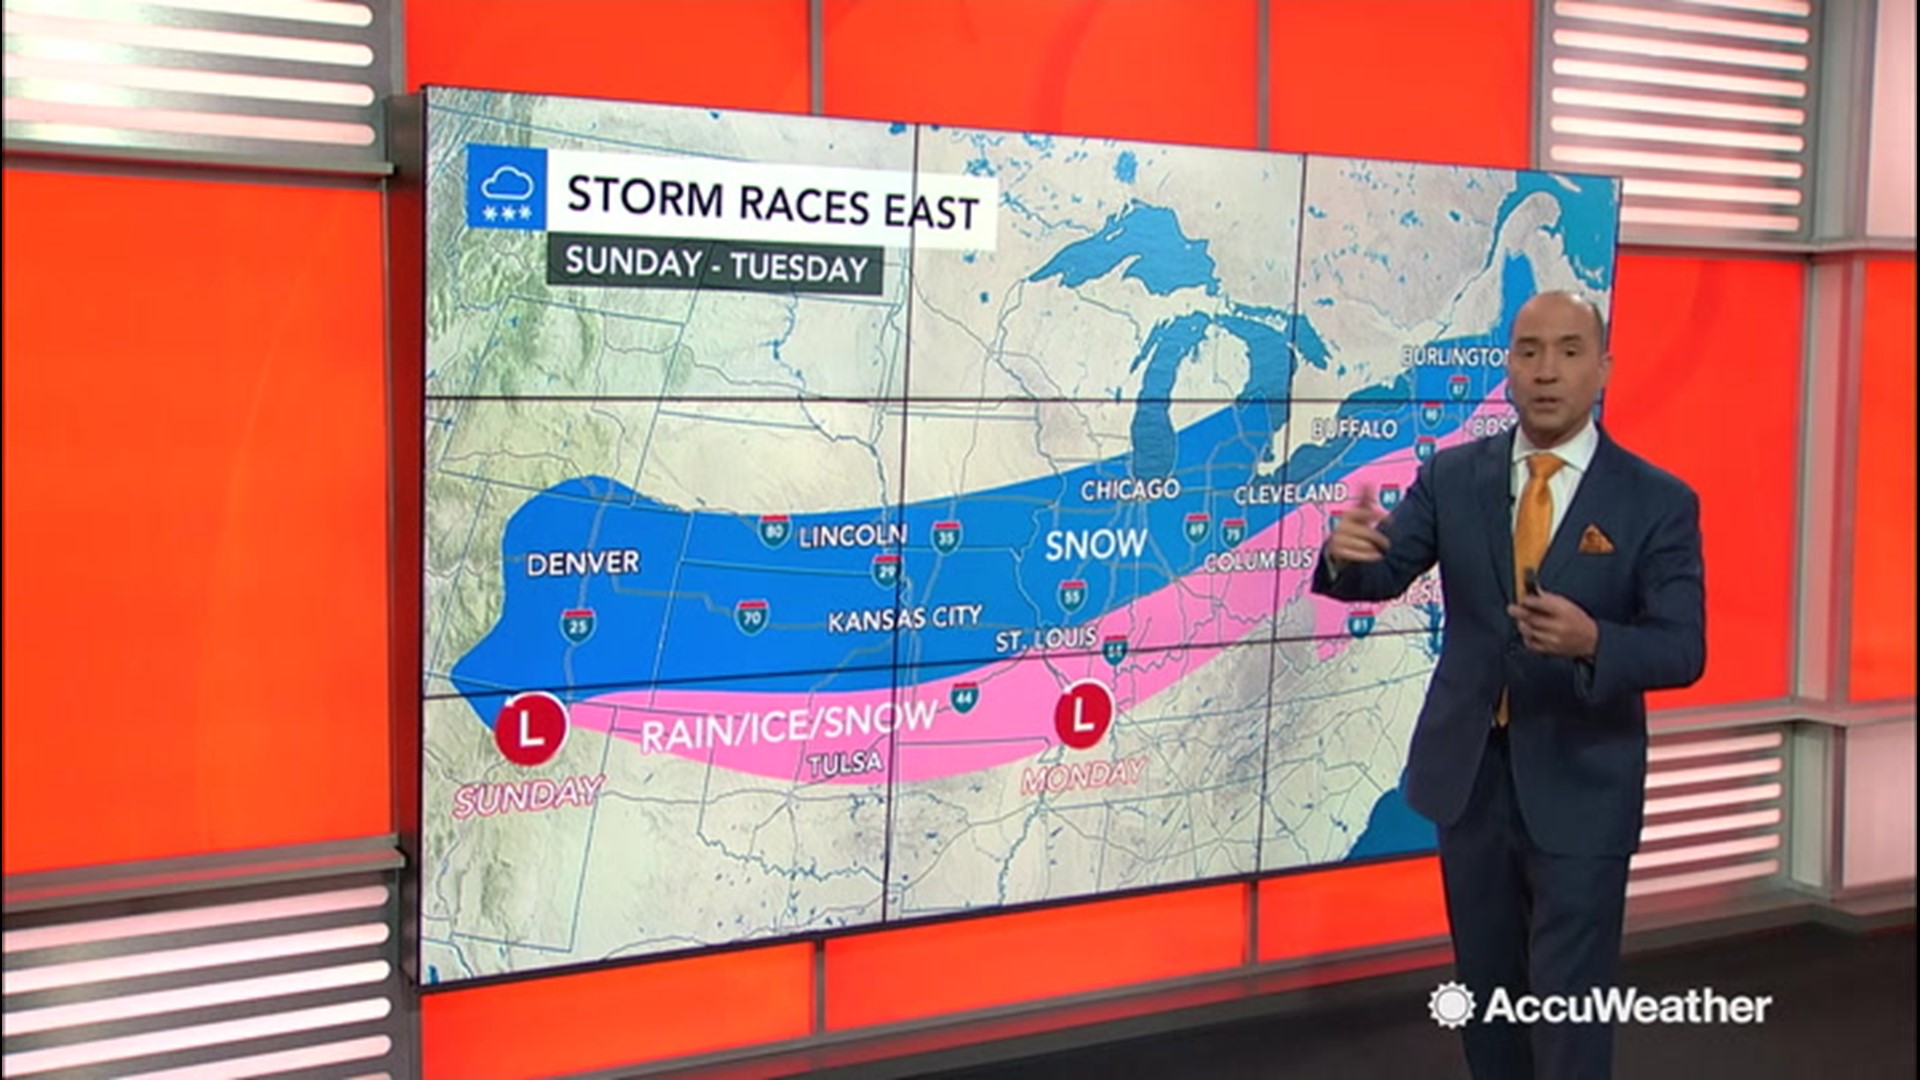 As of Friday, the storm is still way out over the Pacific, but it's on the move. AccuWeather's chief broadcast meteorologist has details on the timing and track of the storm.